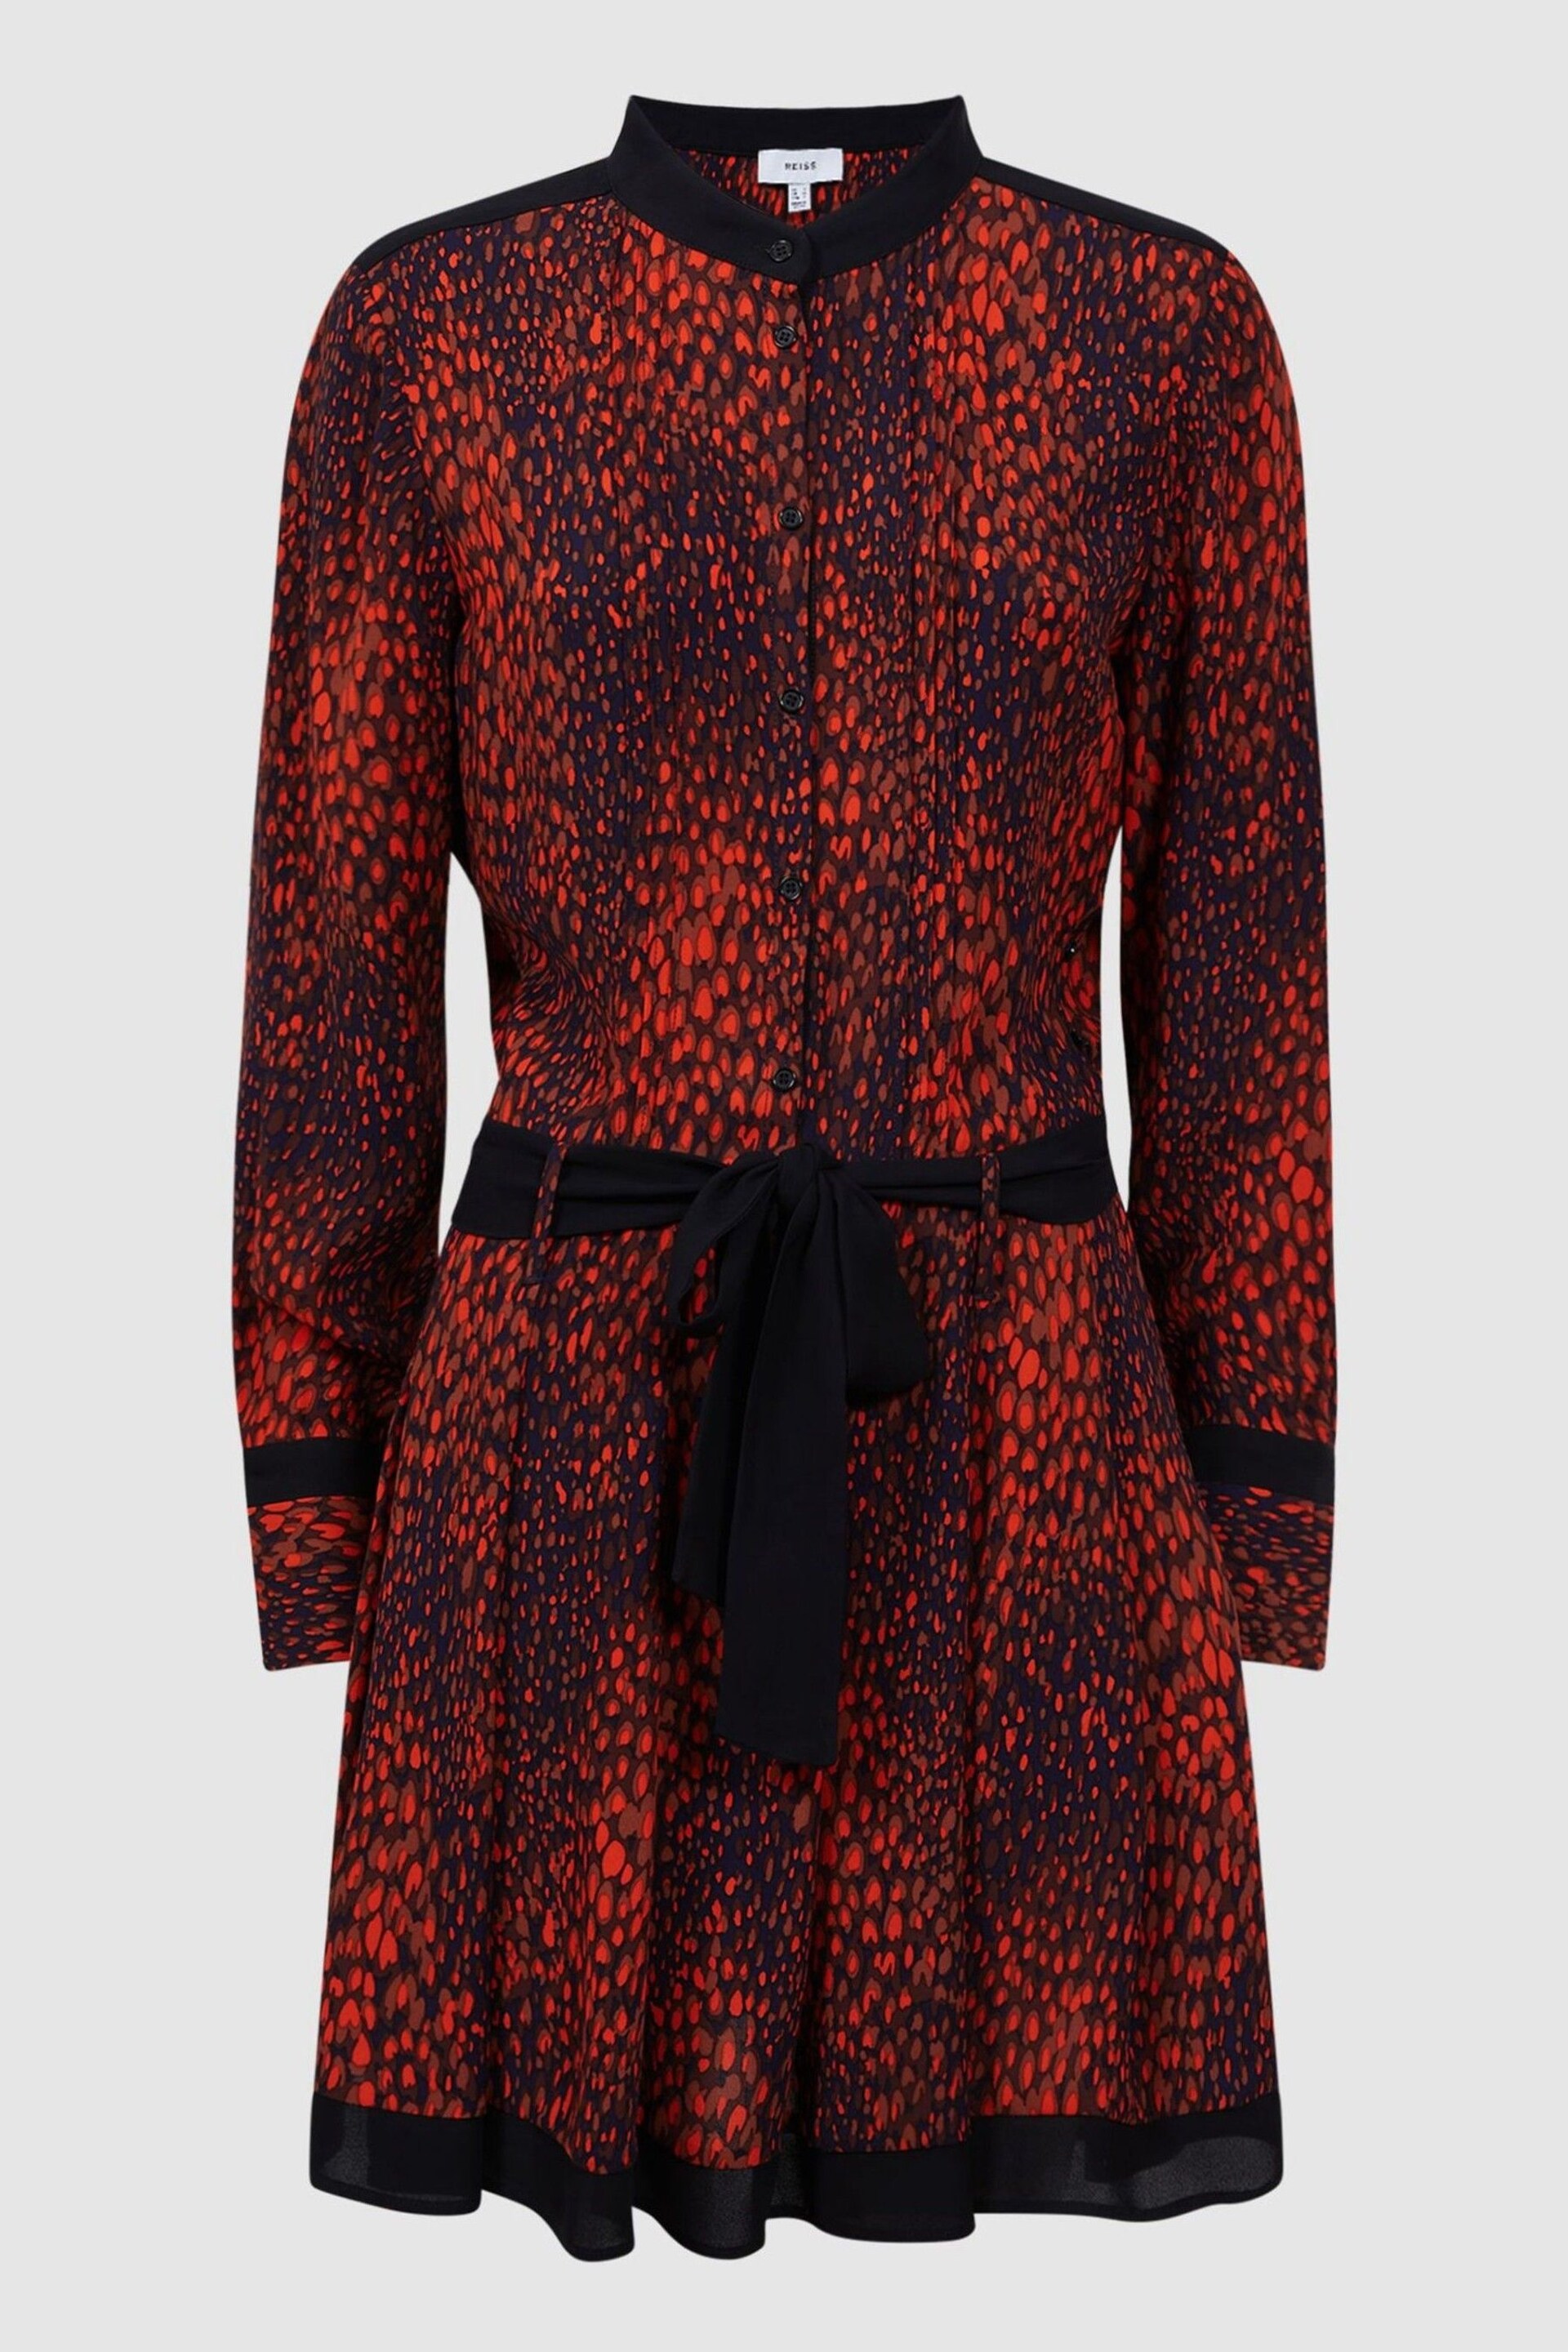 Reiss Red Kinsey Animal Print Belted Mini Dress - Image 2 of 5